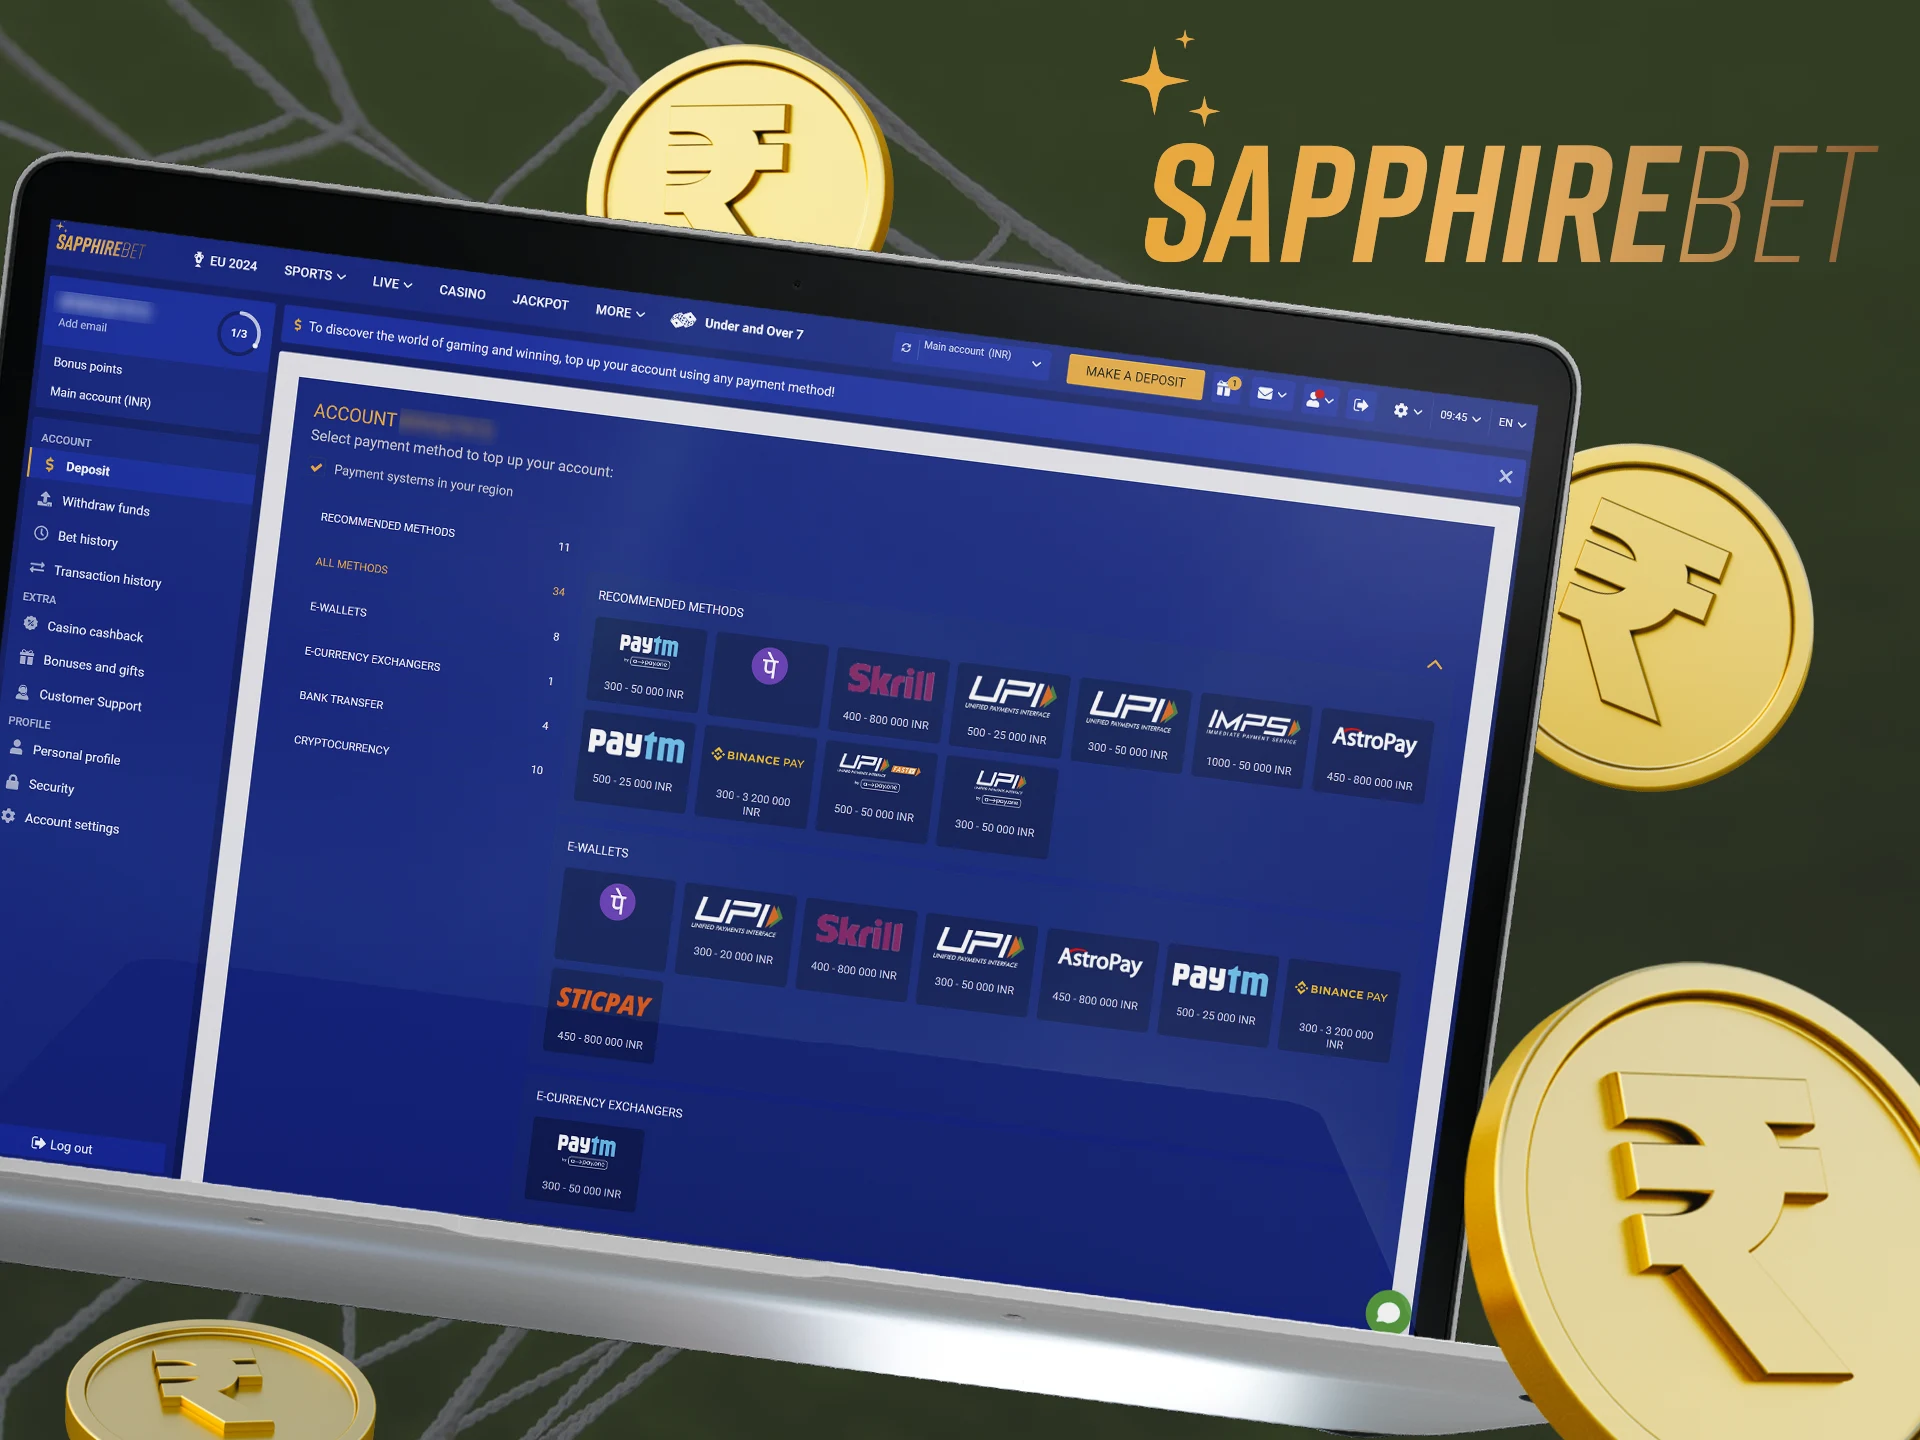 Find out what payment methods are available at SapphireBet.